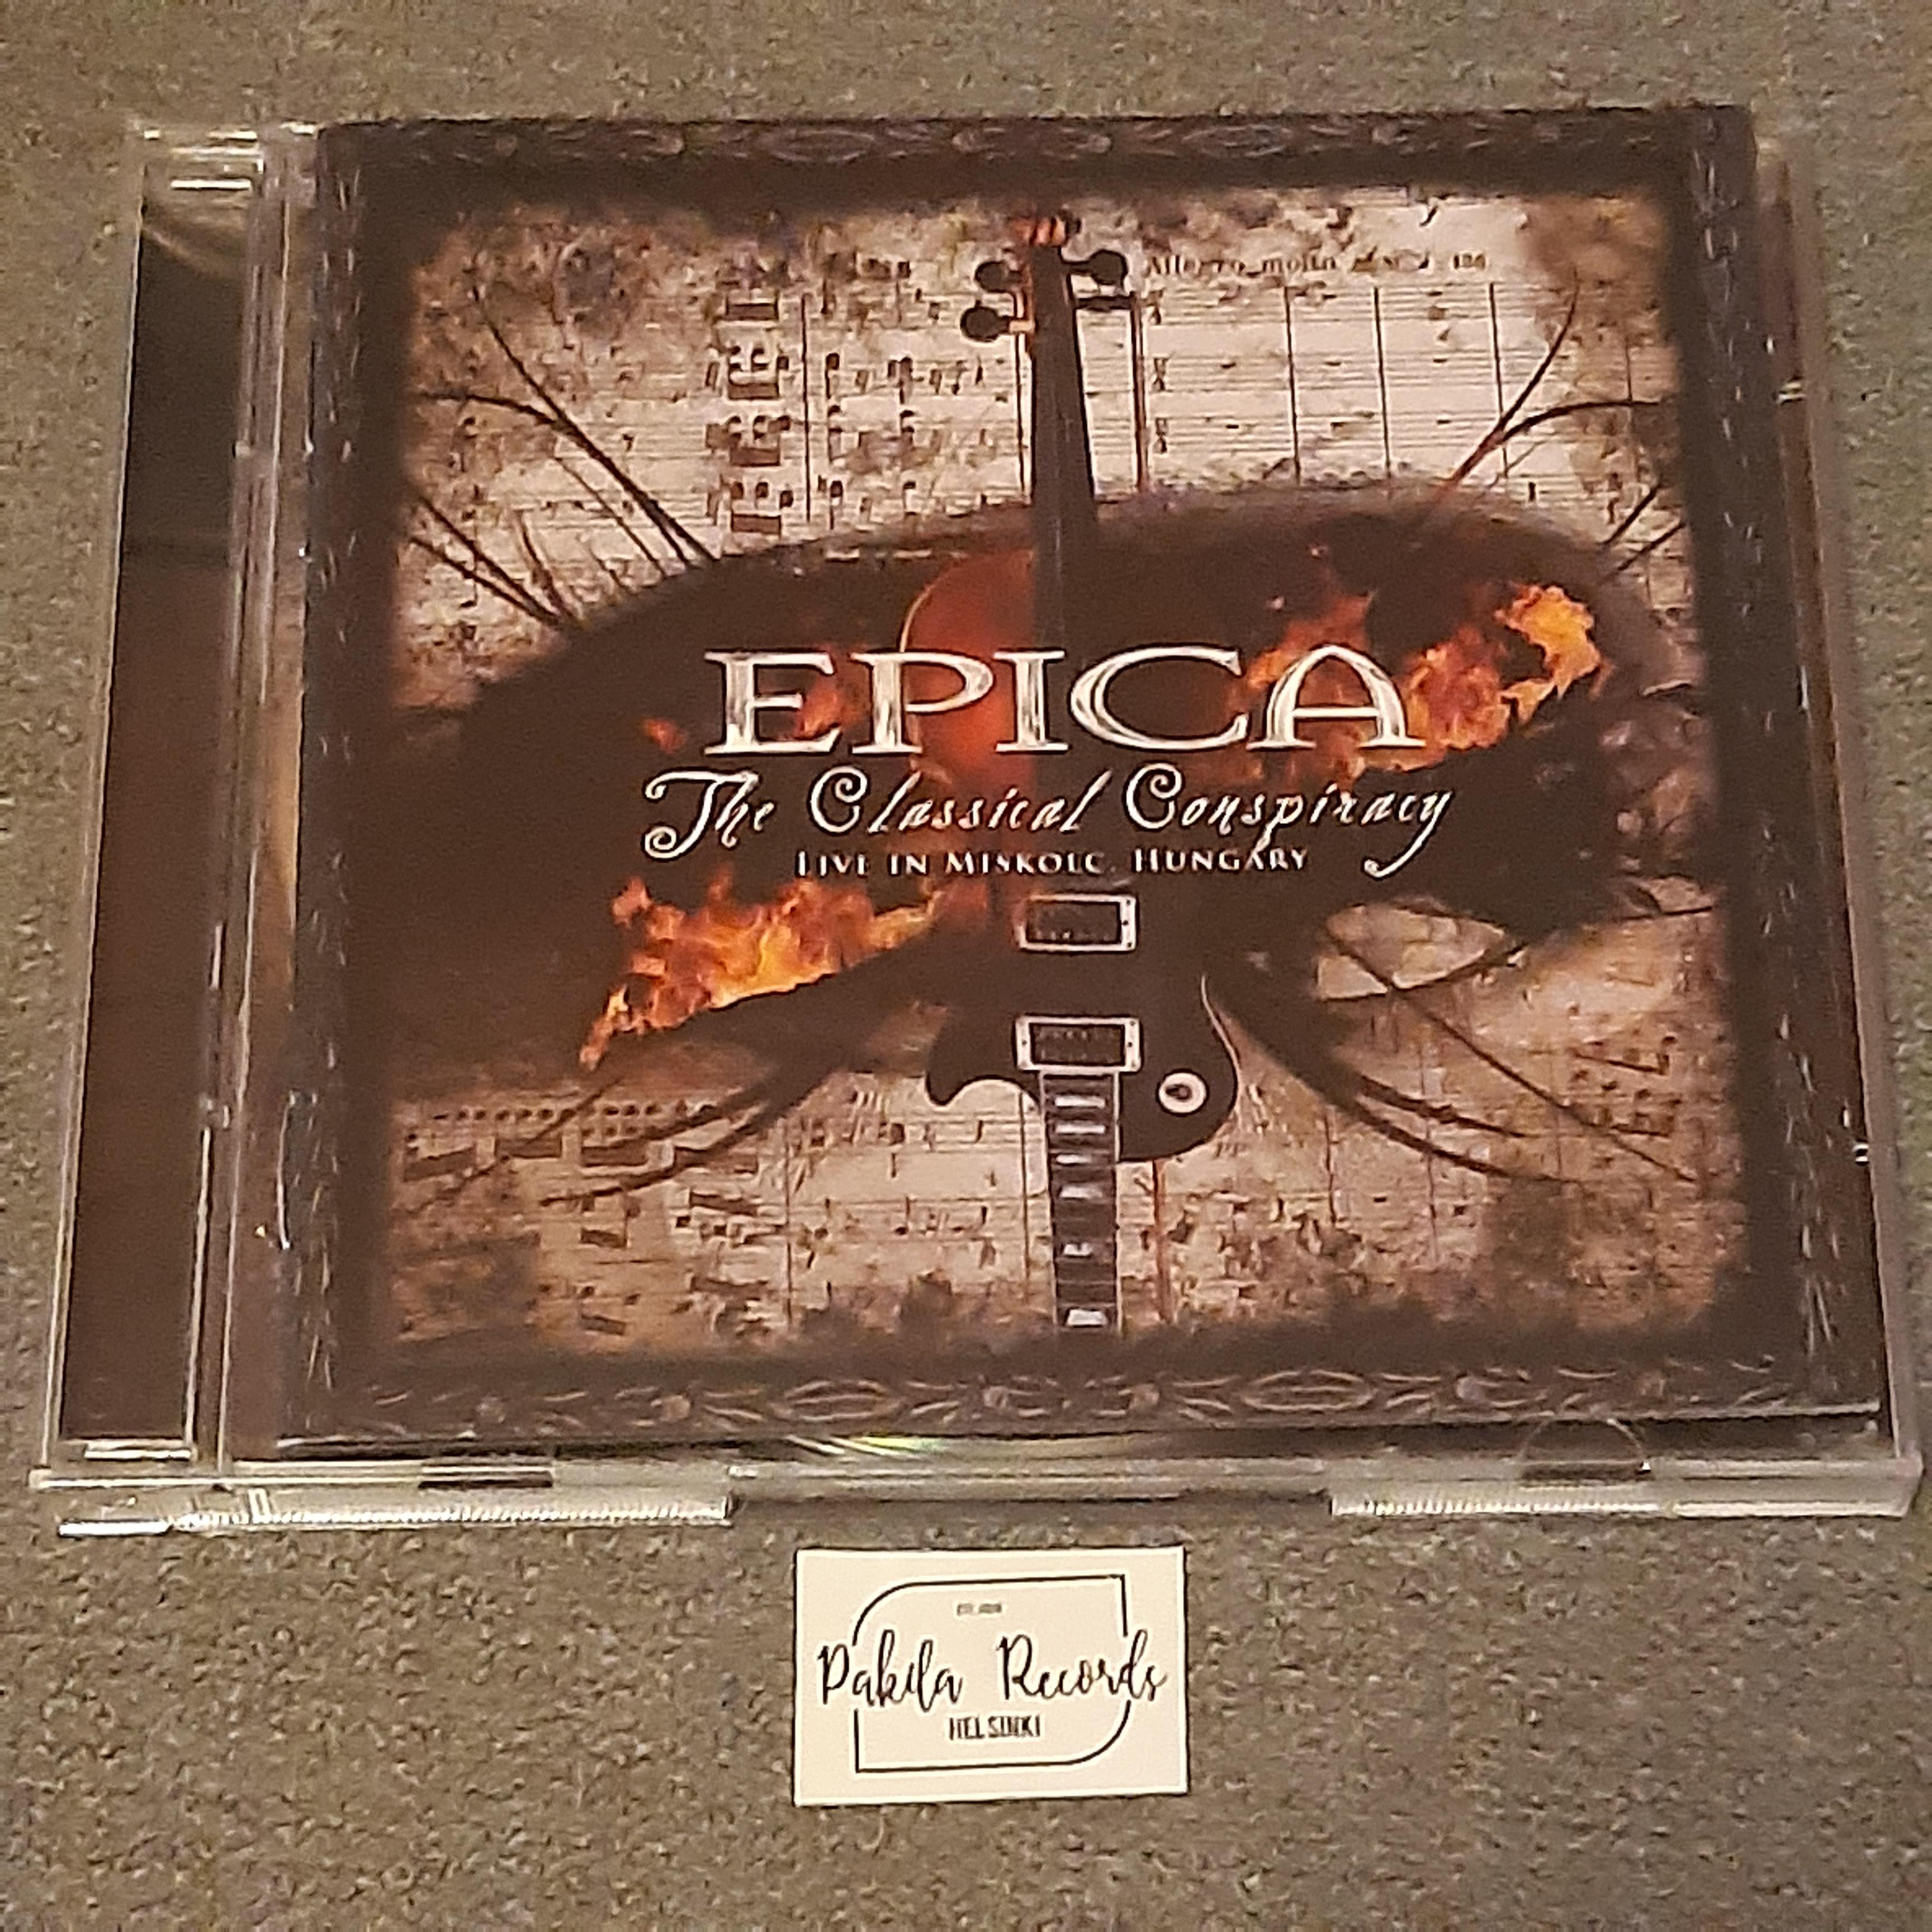 Epica - The Classical Conspiracy (Live In Miskolc, Hungary) - 2 CD (käytetty)